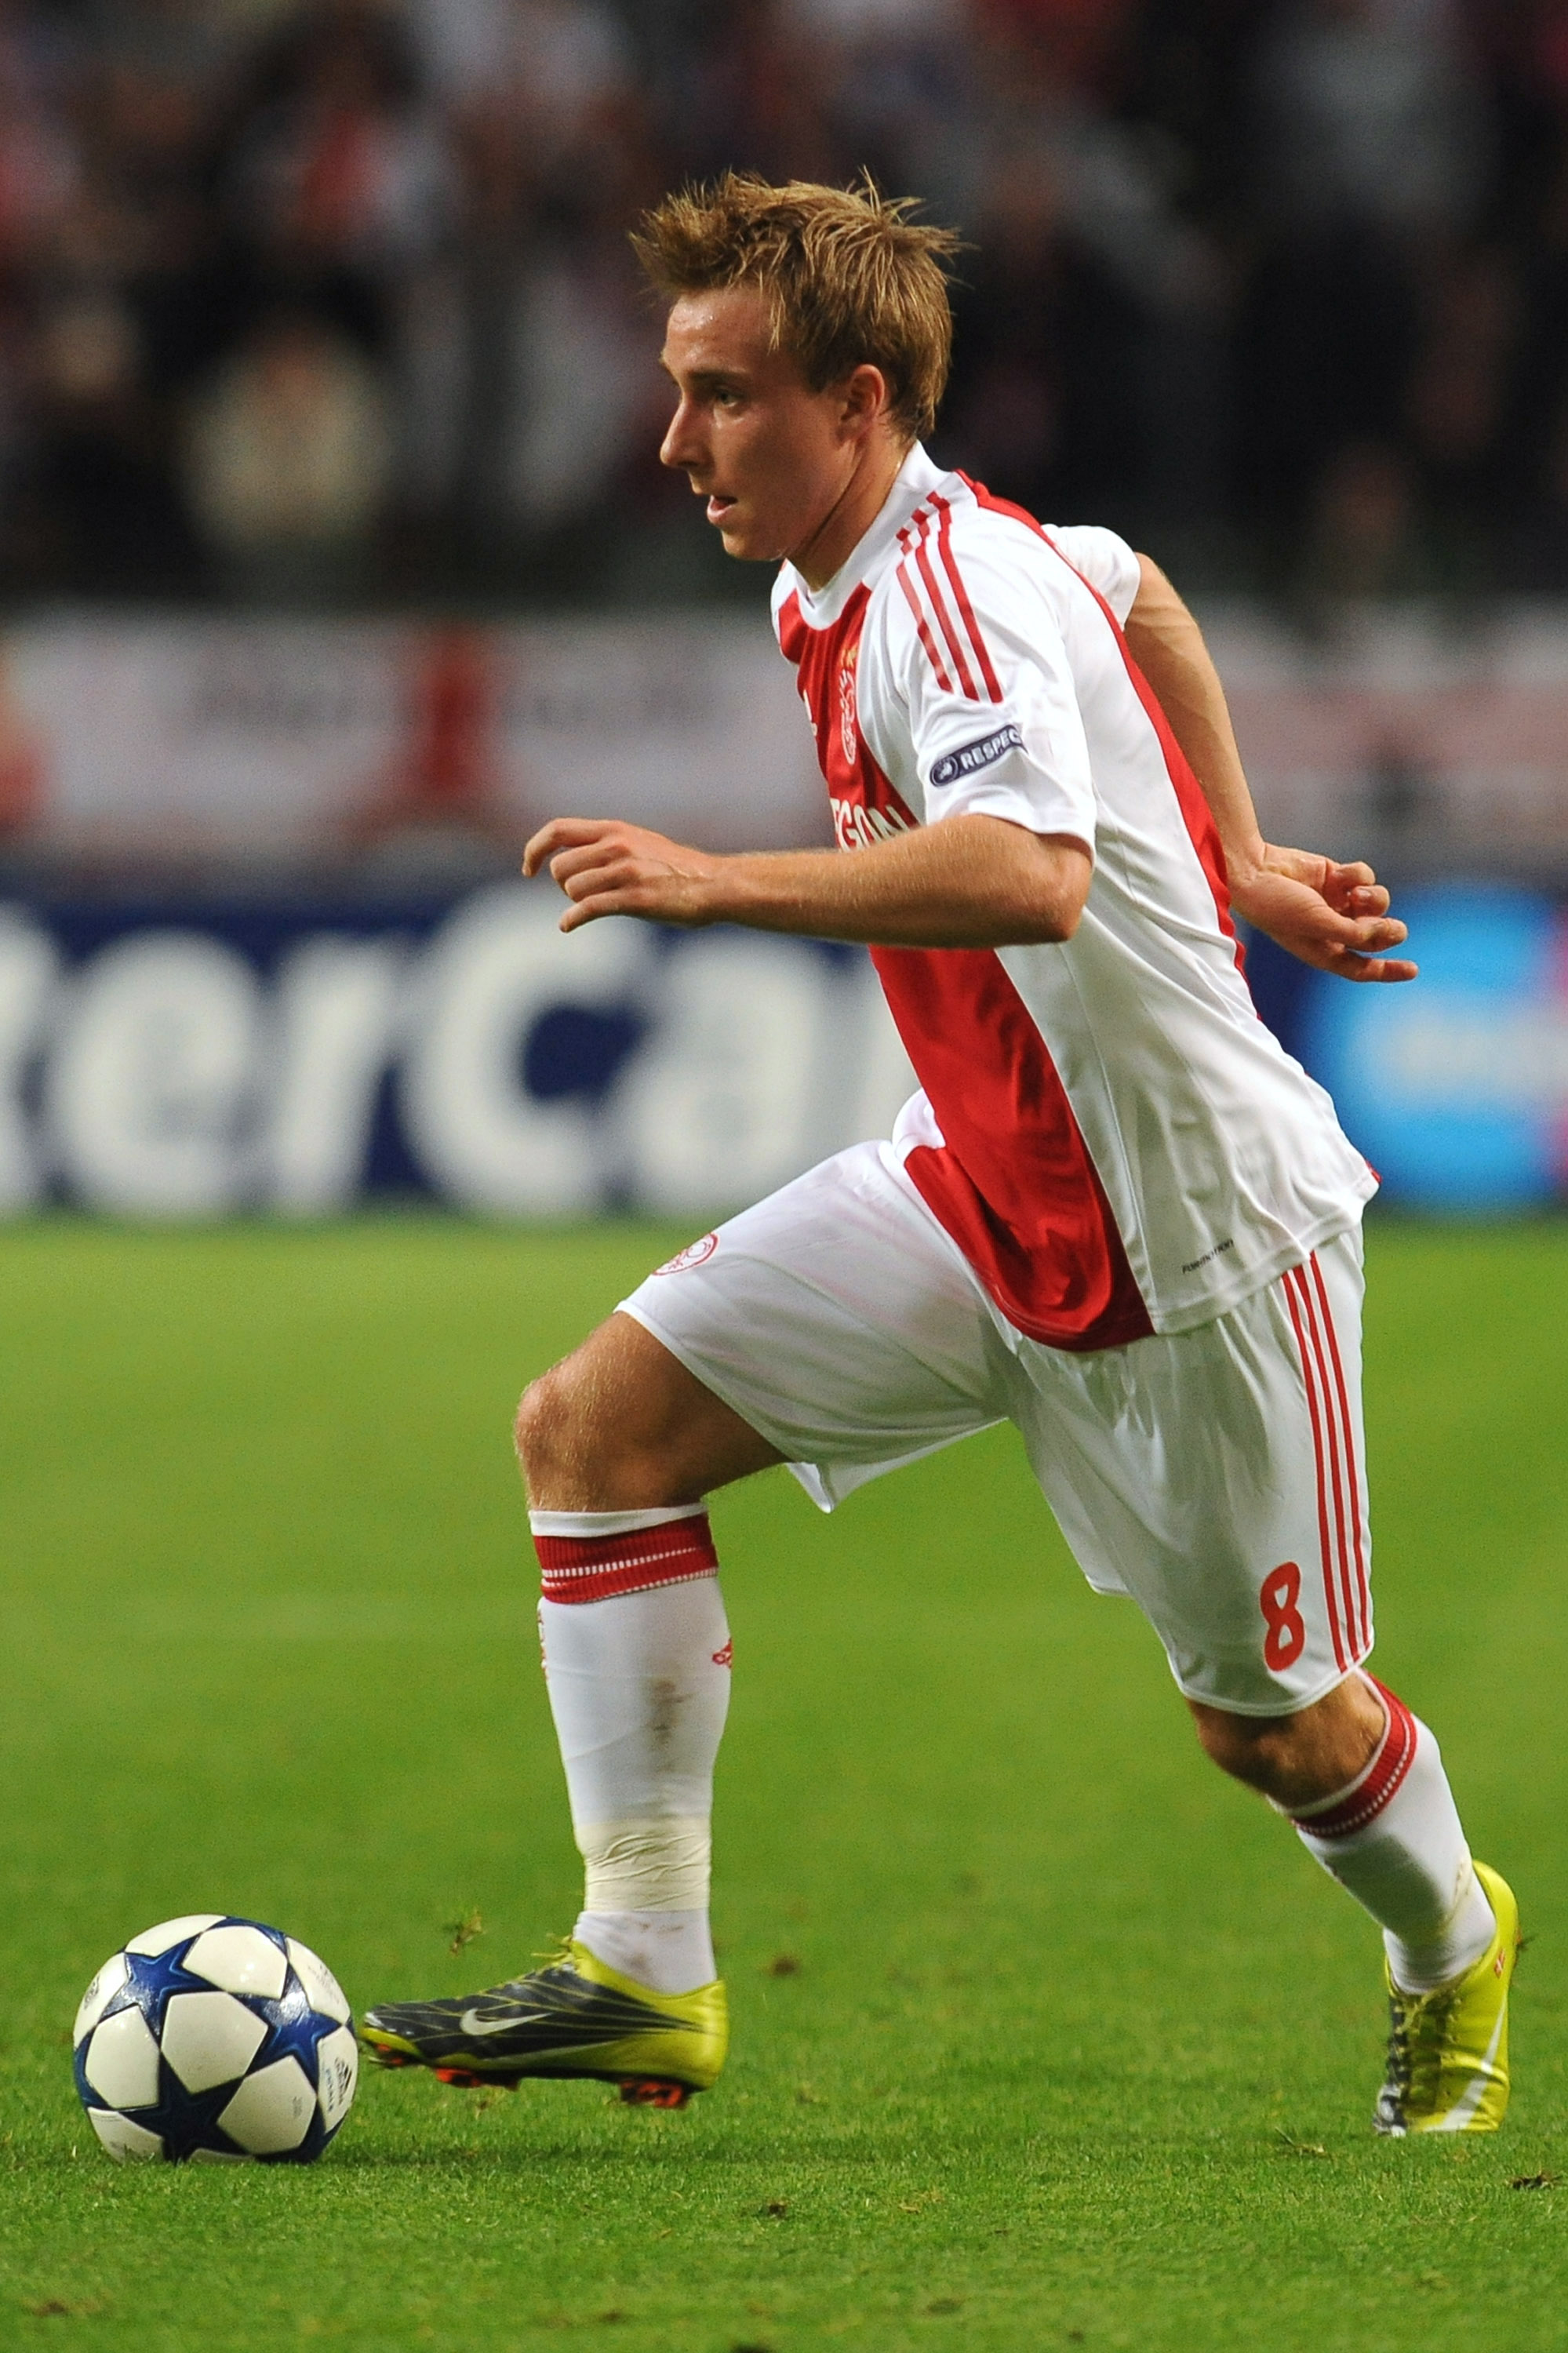 AMSTERDAM, NETHERLANDS - AUGUST 25:  Christian Eriksen of AFC Ajax in action during the Champions League Play-off match between AFC Ajax and FC Dynamo Kiev at Amsterdam Arena on August 25, 2010 in Amsterdam, Netherlands.  (Photo by Valerio Pennicino/Getty